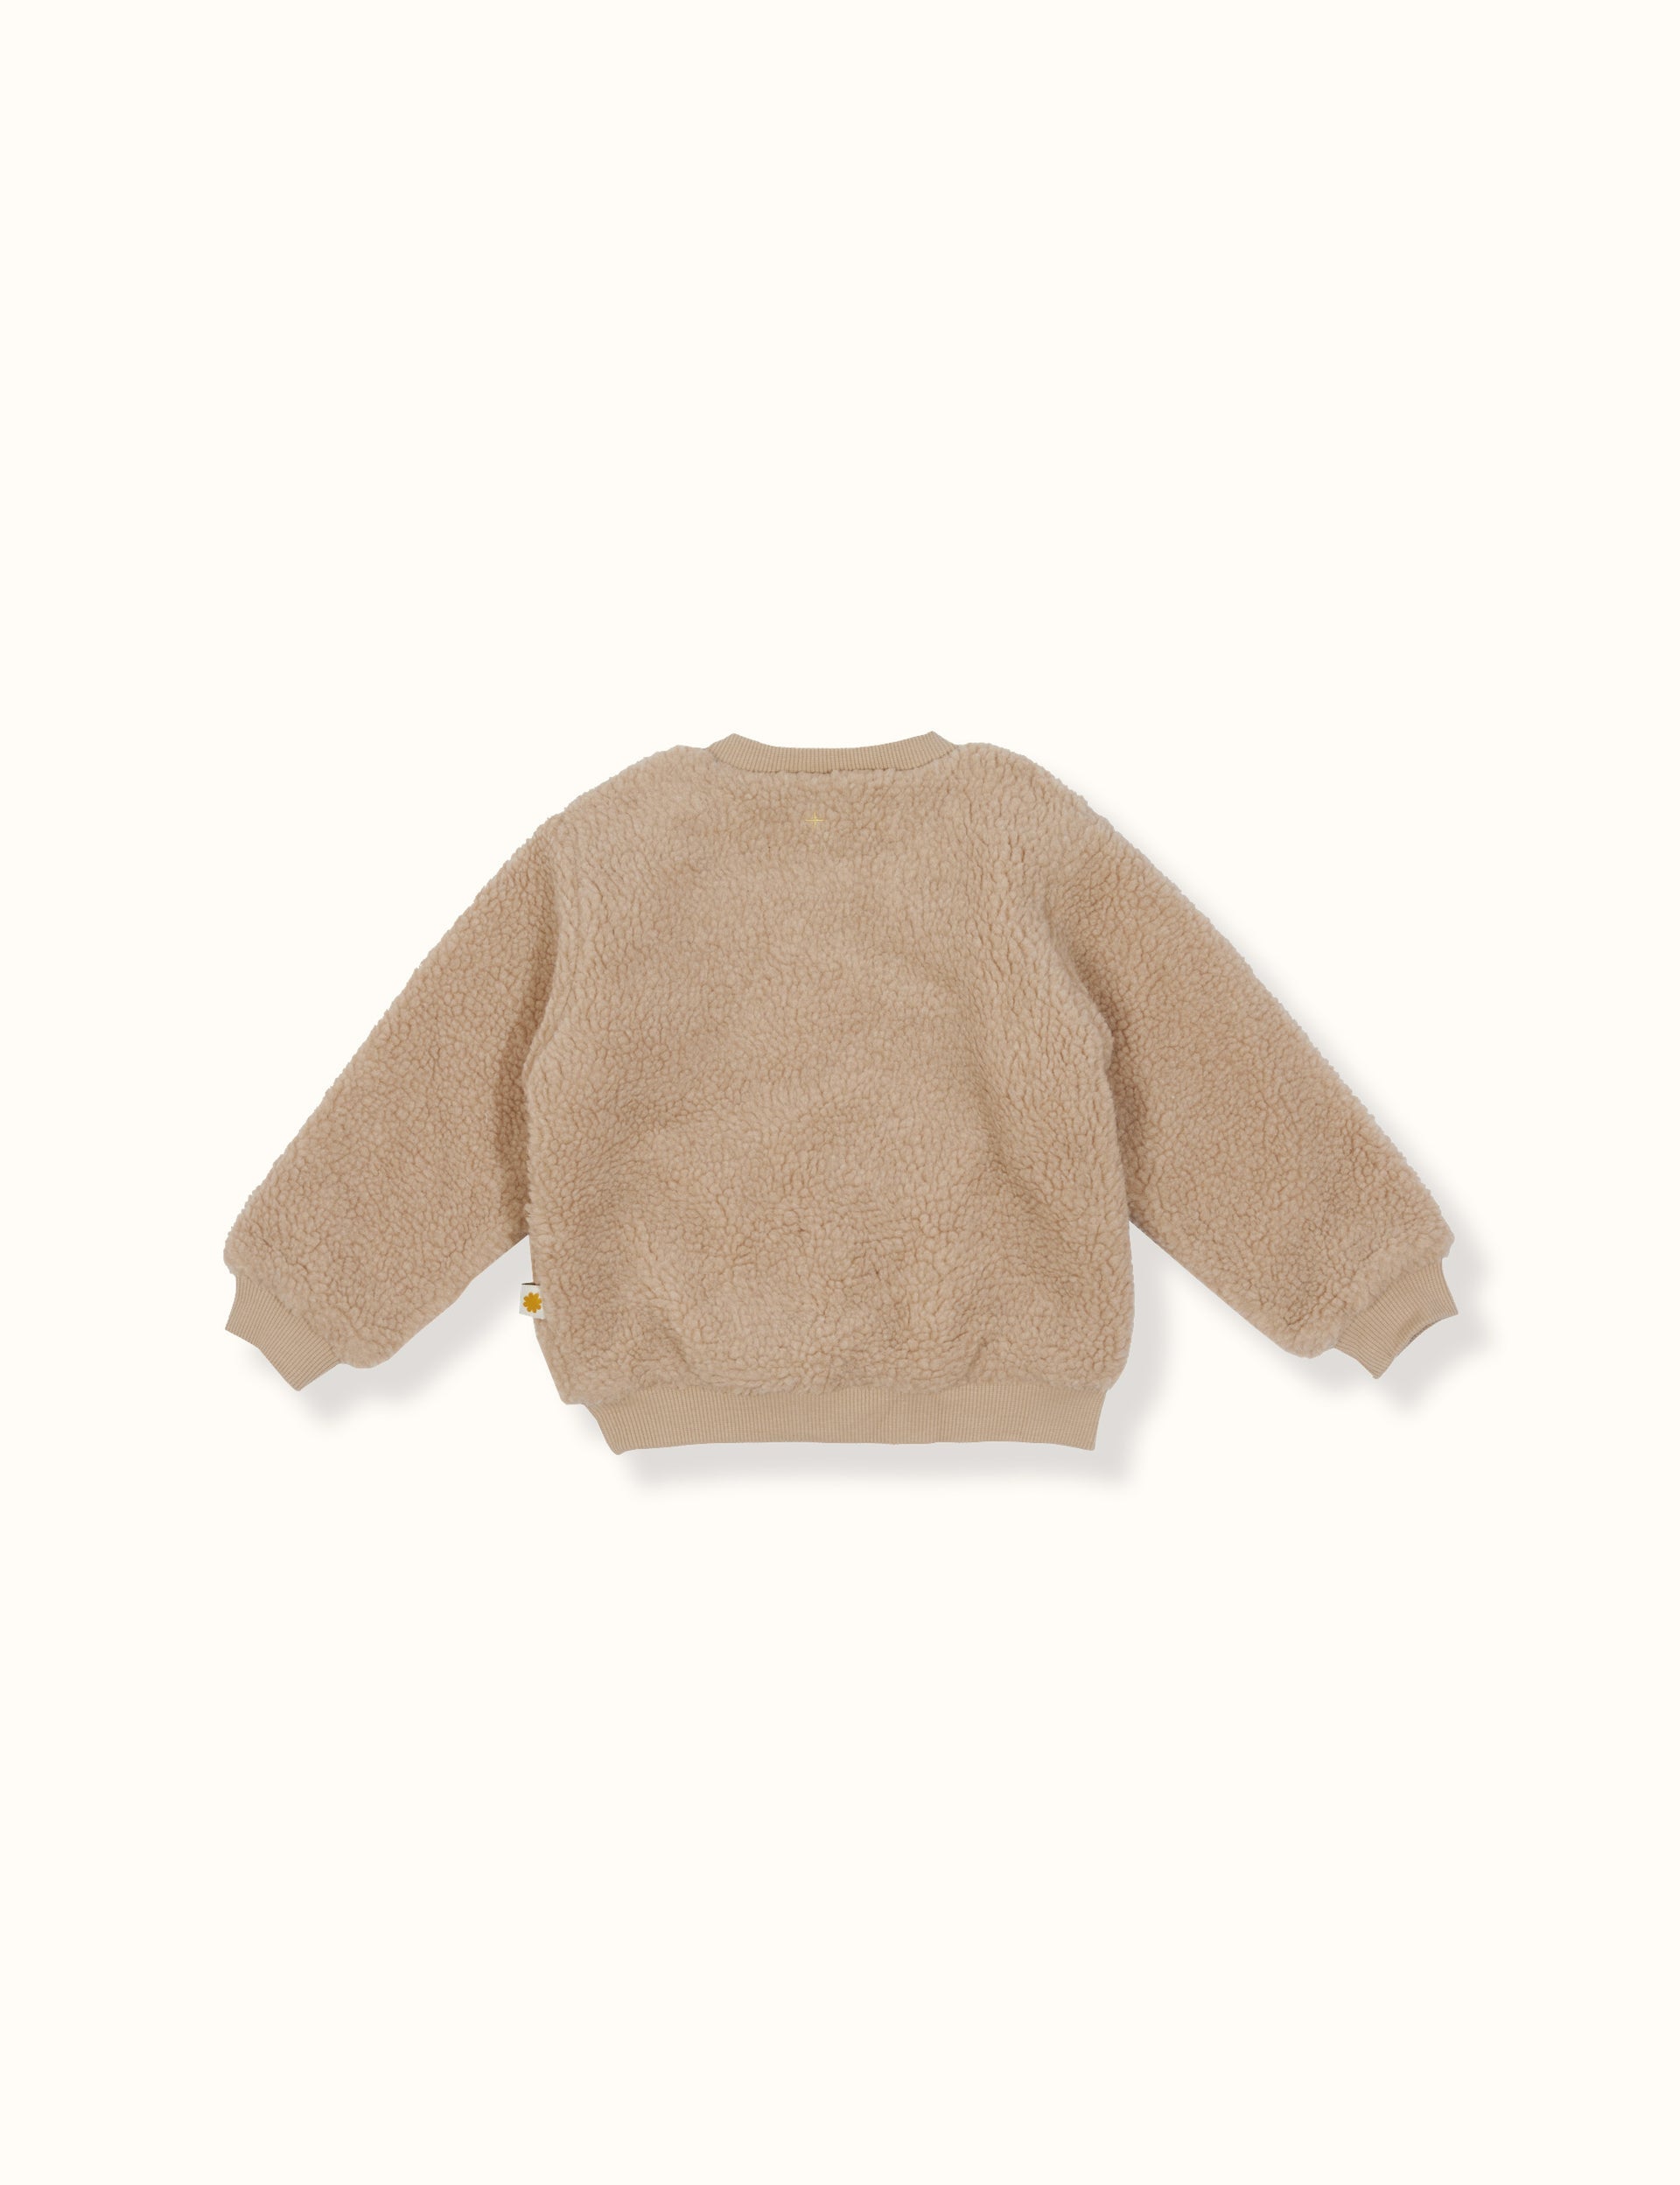 Goldie & Ace - Clubhouse Teddy Sweater - Sand